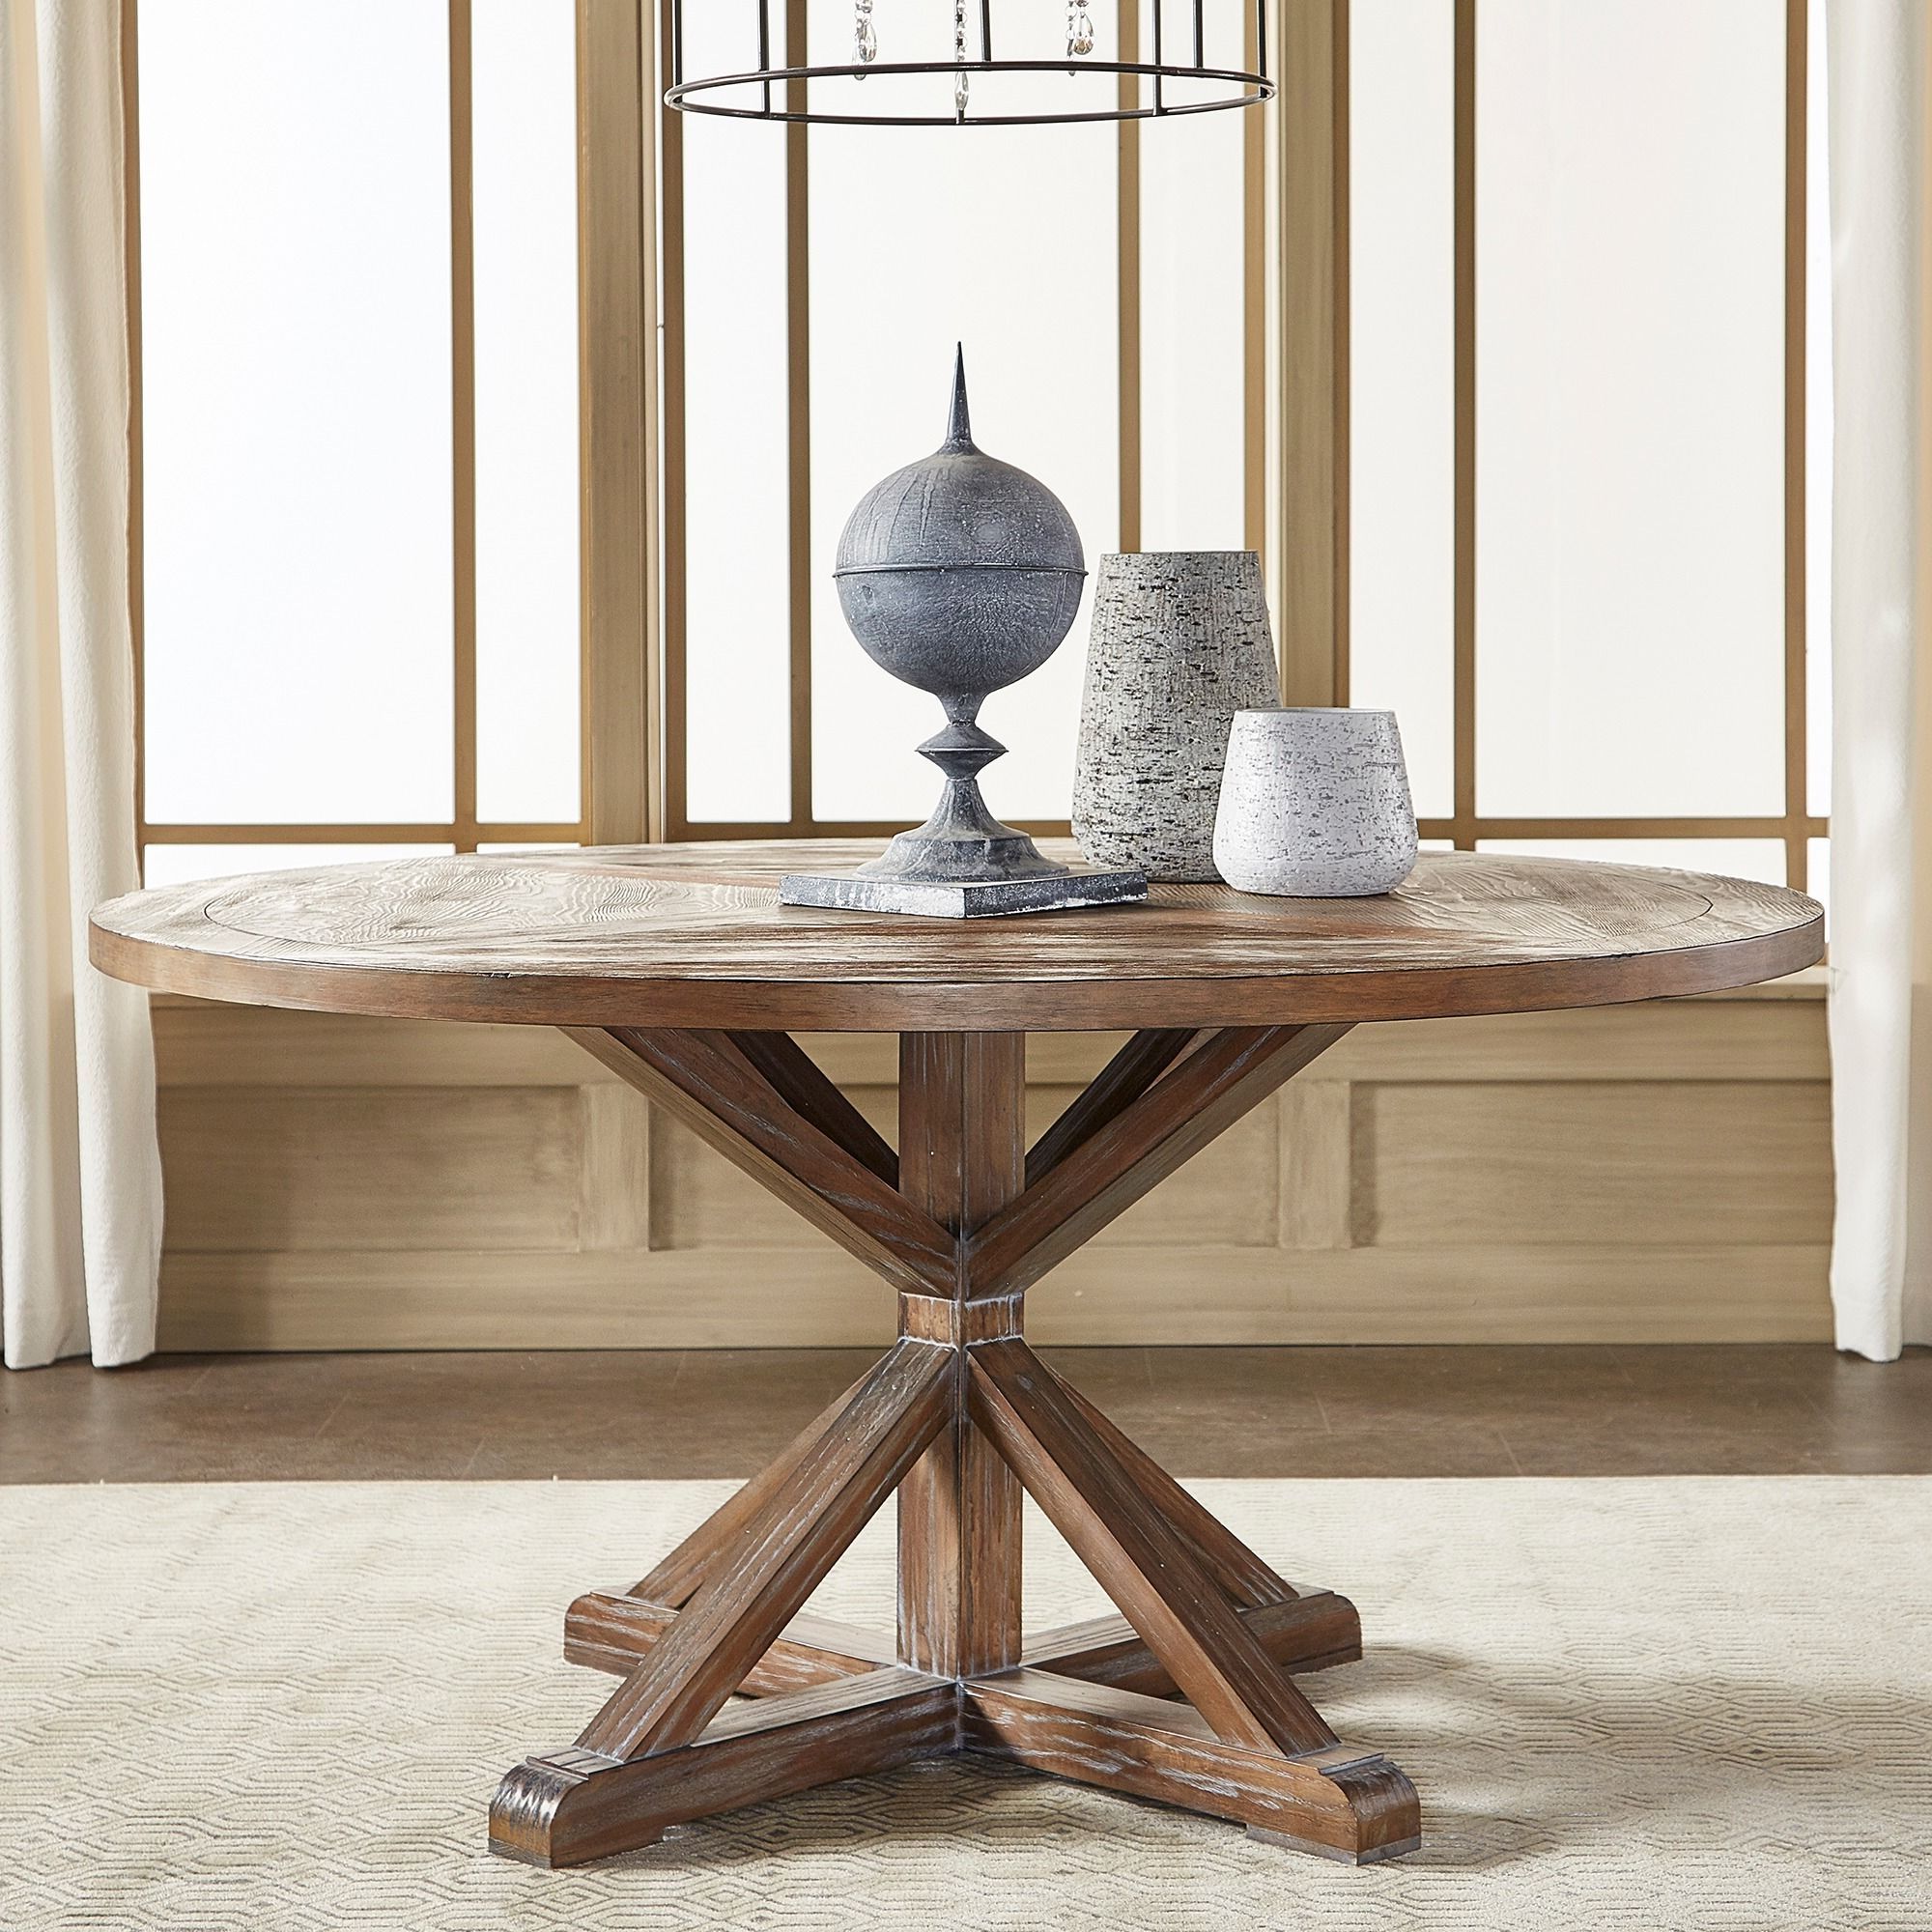 Most Current Benchwright Rustic X Base Round Pine Wood Dining Table Within Rustic Mahogany Benchwright Pedestal Extending Dining Tables (View 11 of 25)